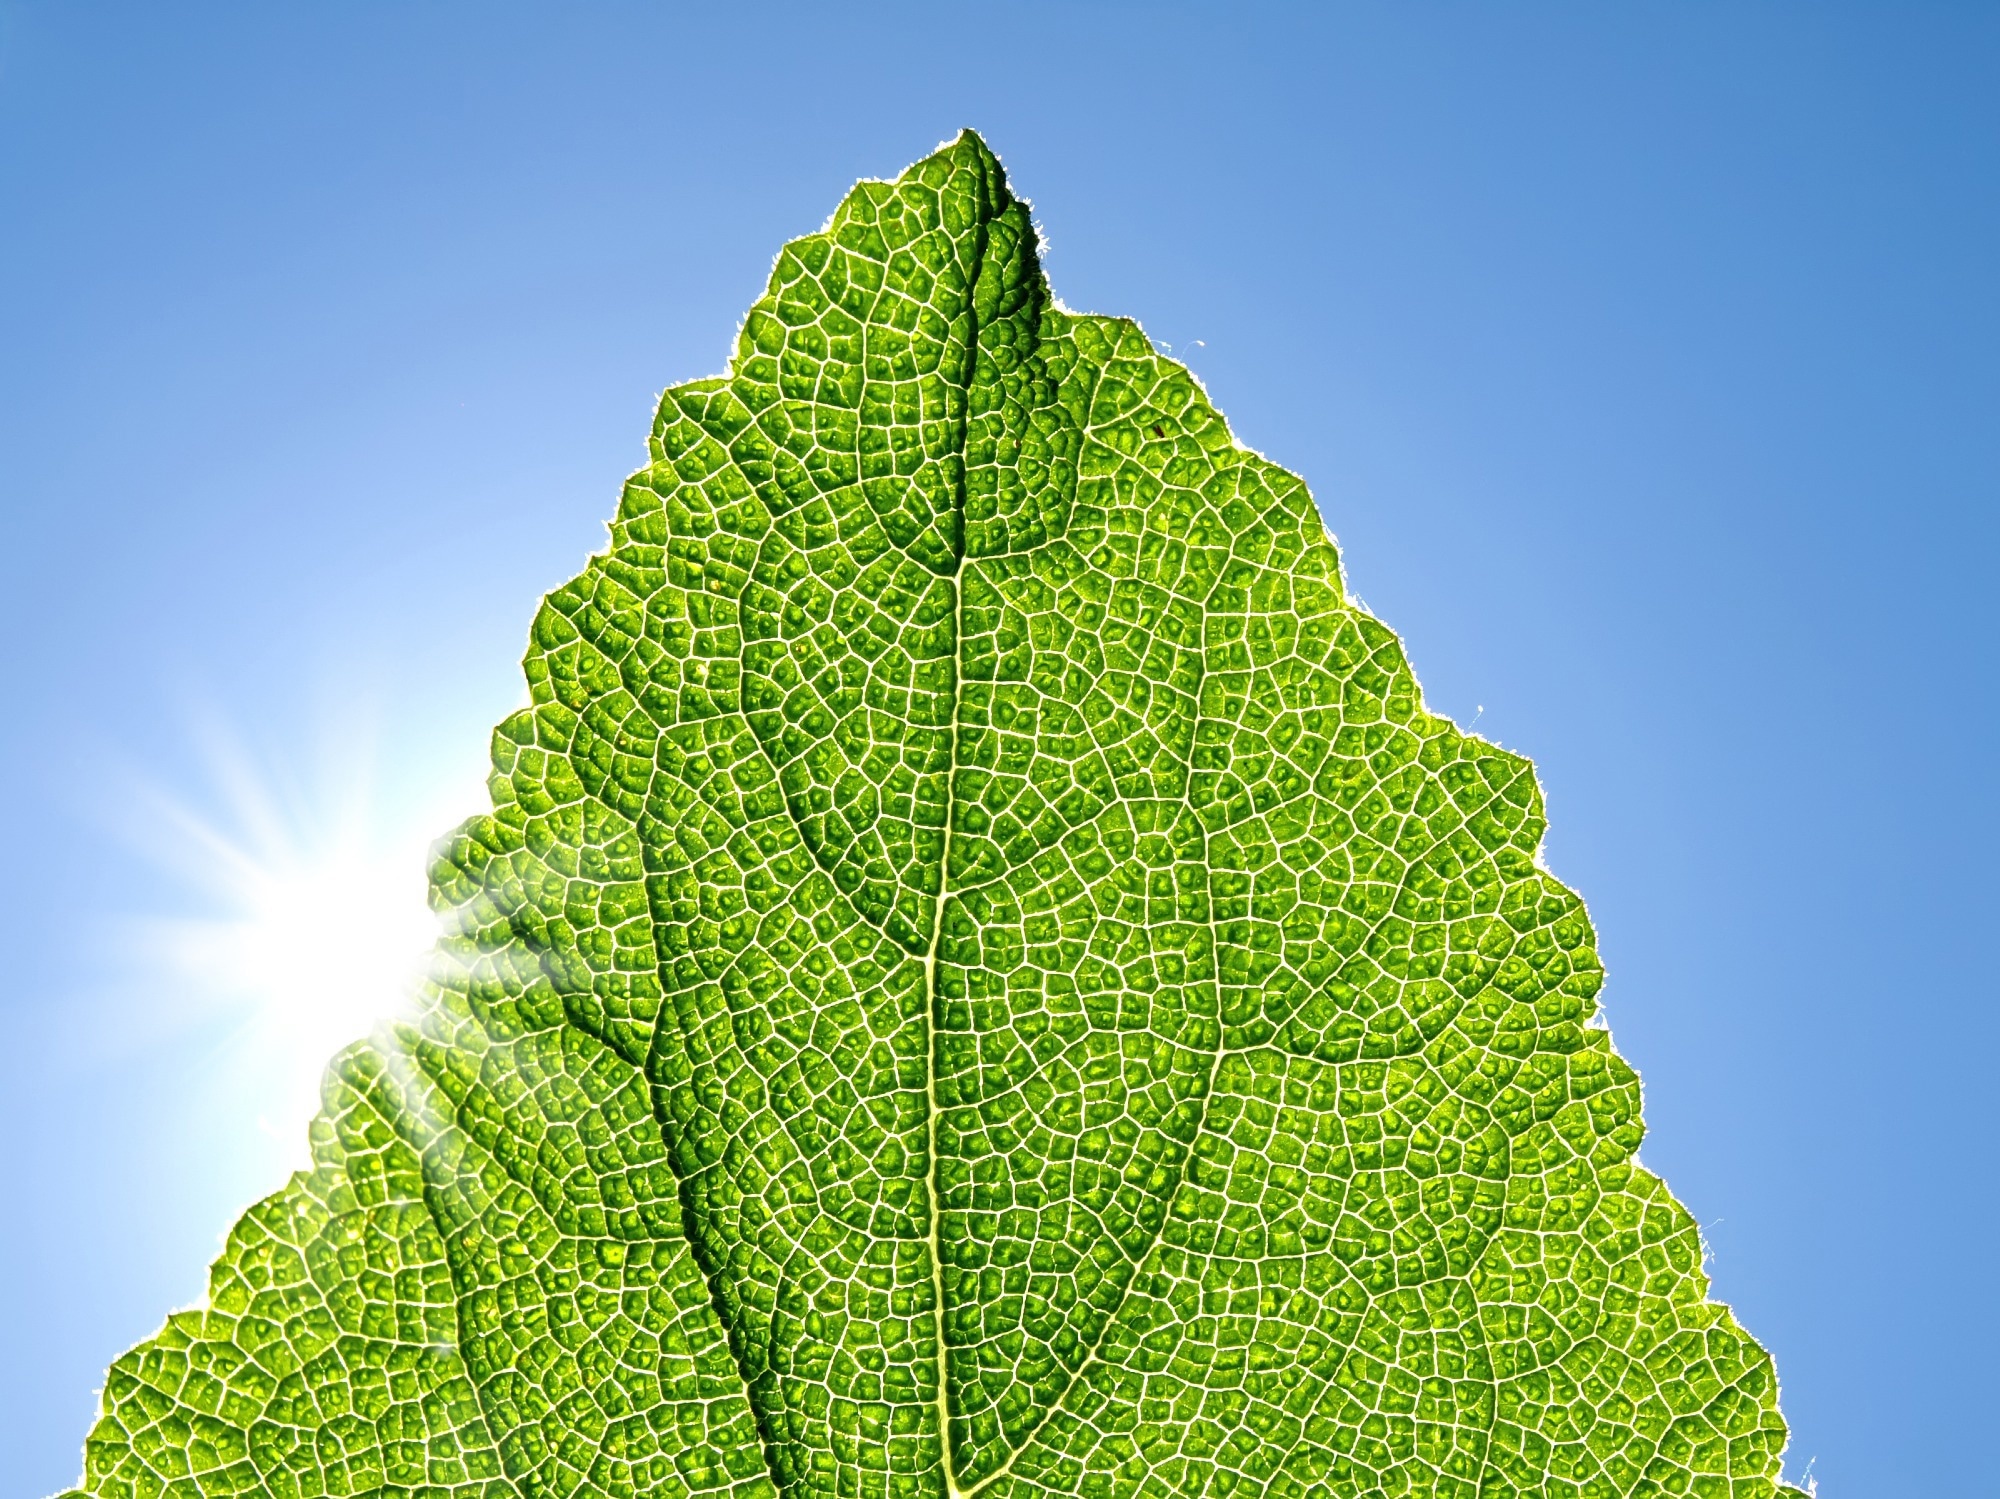 Mimicking Photosynthesis to Enhance Chemical Reactions.